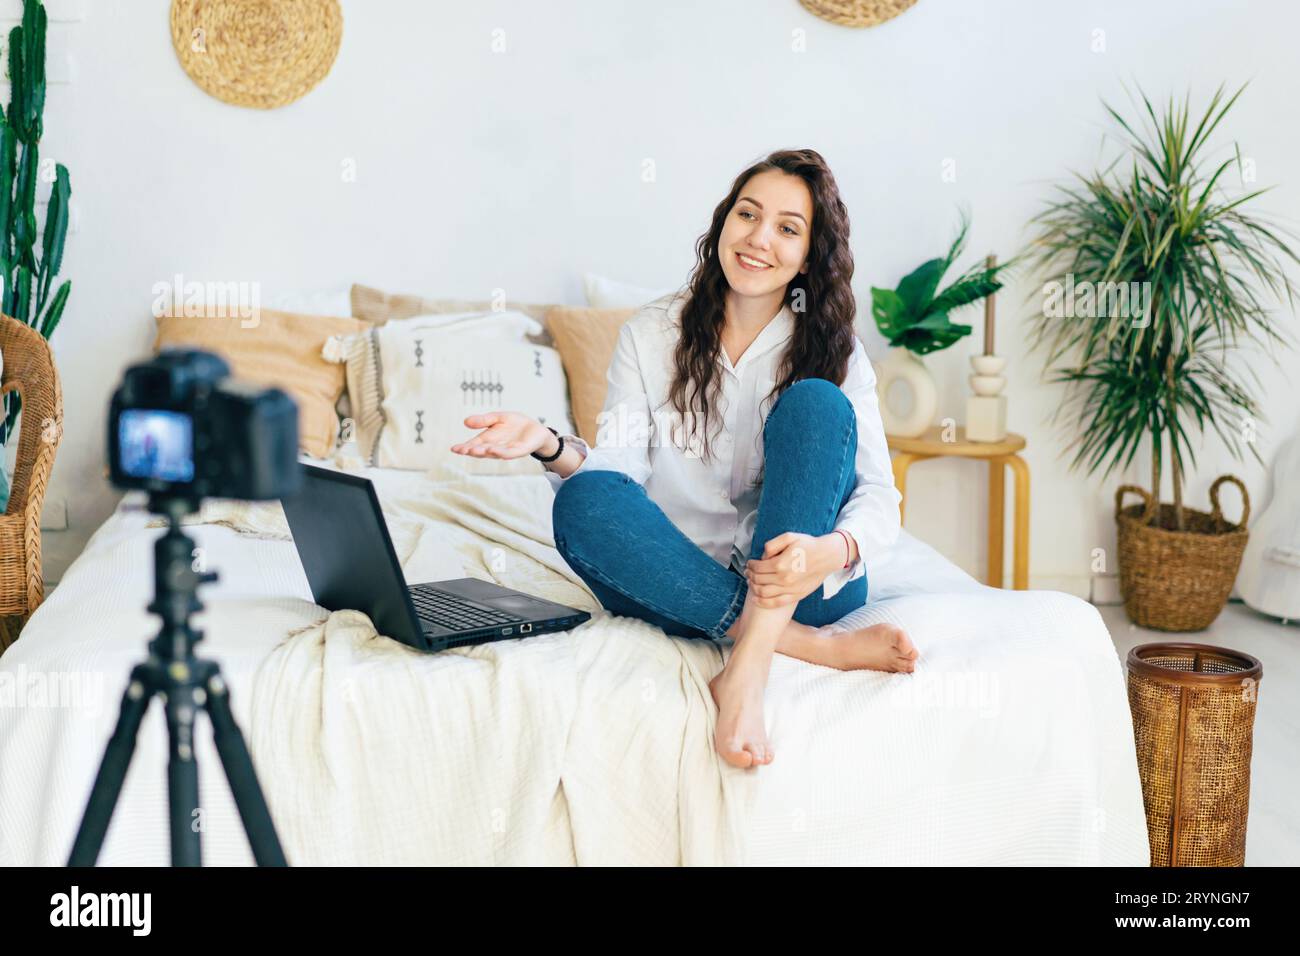 The blogger girl sits on the bed in the bedroom and records a video clip on the camera. Stock Photo